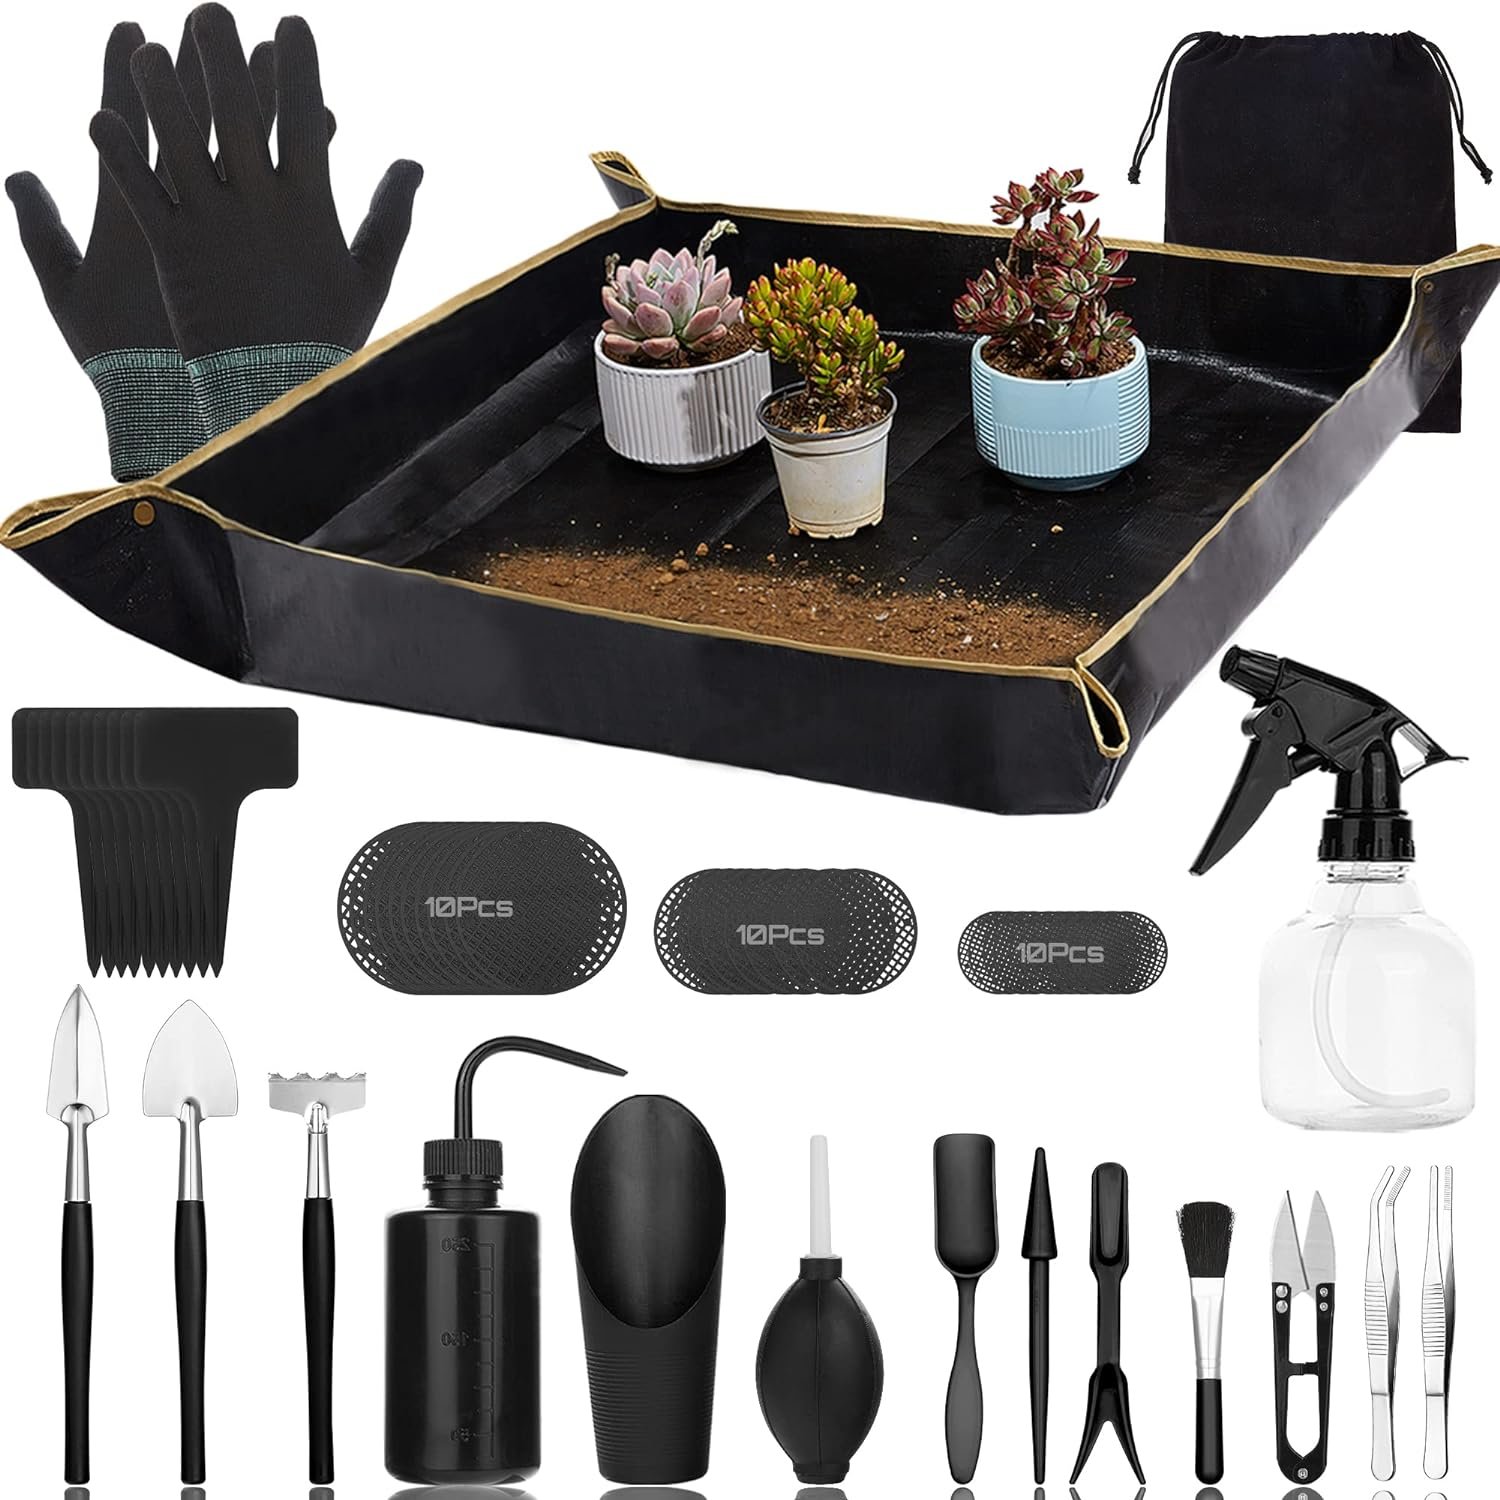 Succulent Tools Kit,57 Pcs Mini Garden Tools ,Bonsai Tree Kit Plant Accessories Indoor Gardening Hand Tools with Repotting Mat, Succulent Kit for Plant Care,Gardening Gifts for Men Women